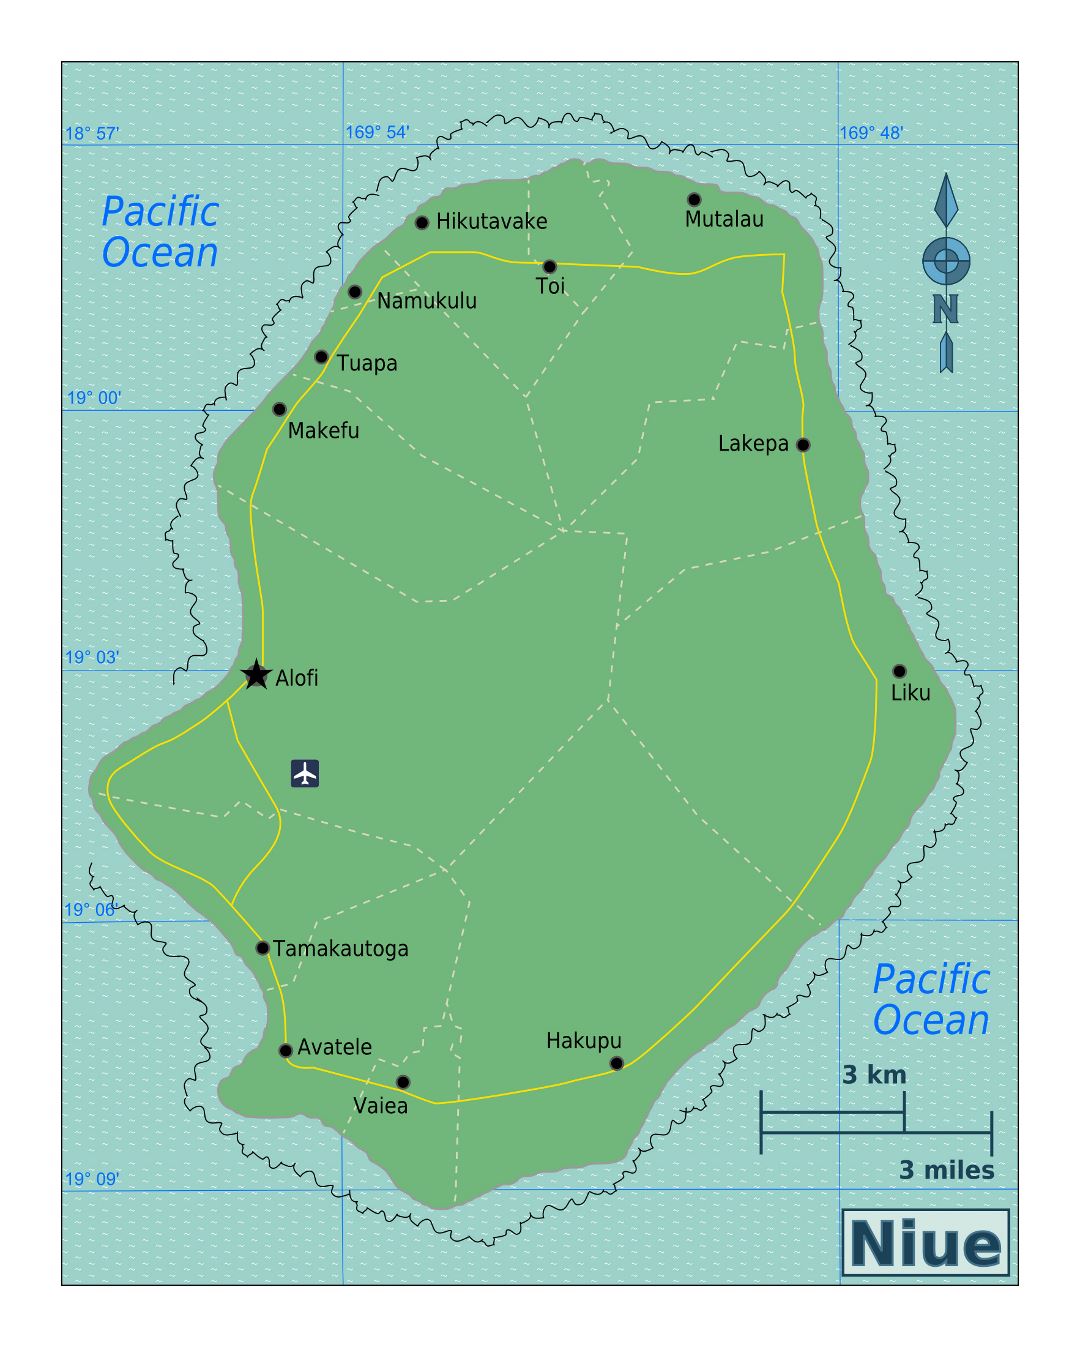 Large map of Niue with roads, cities and airport